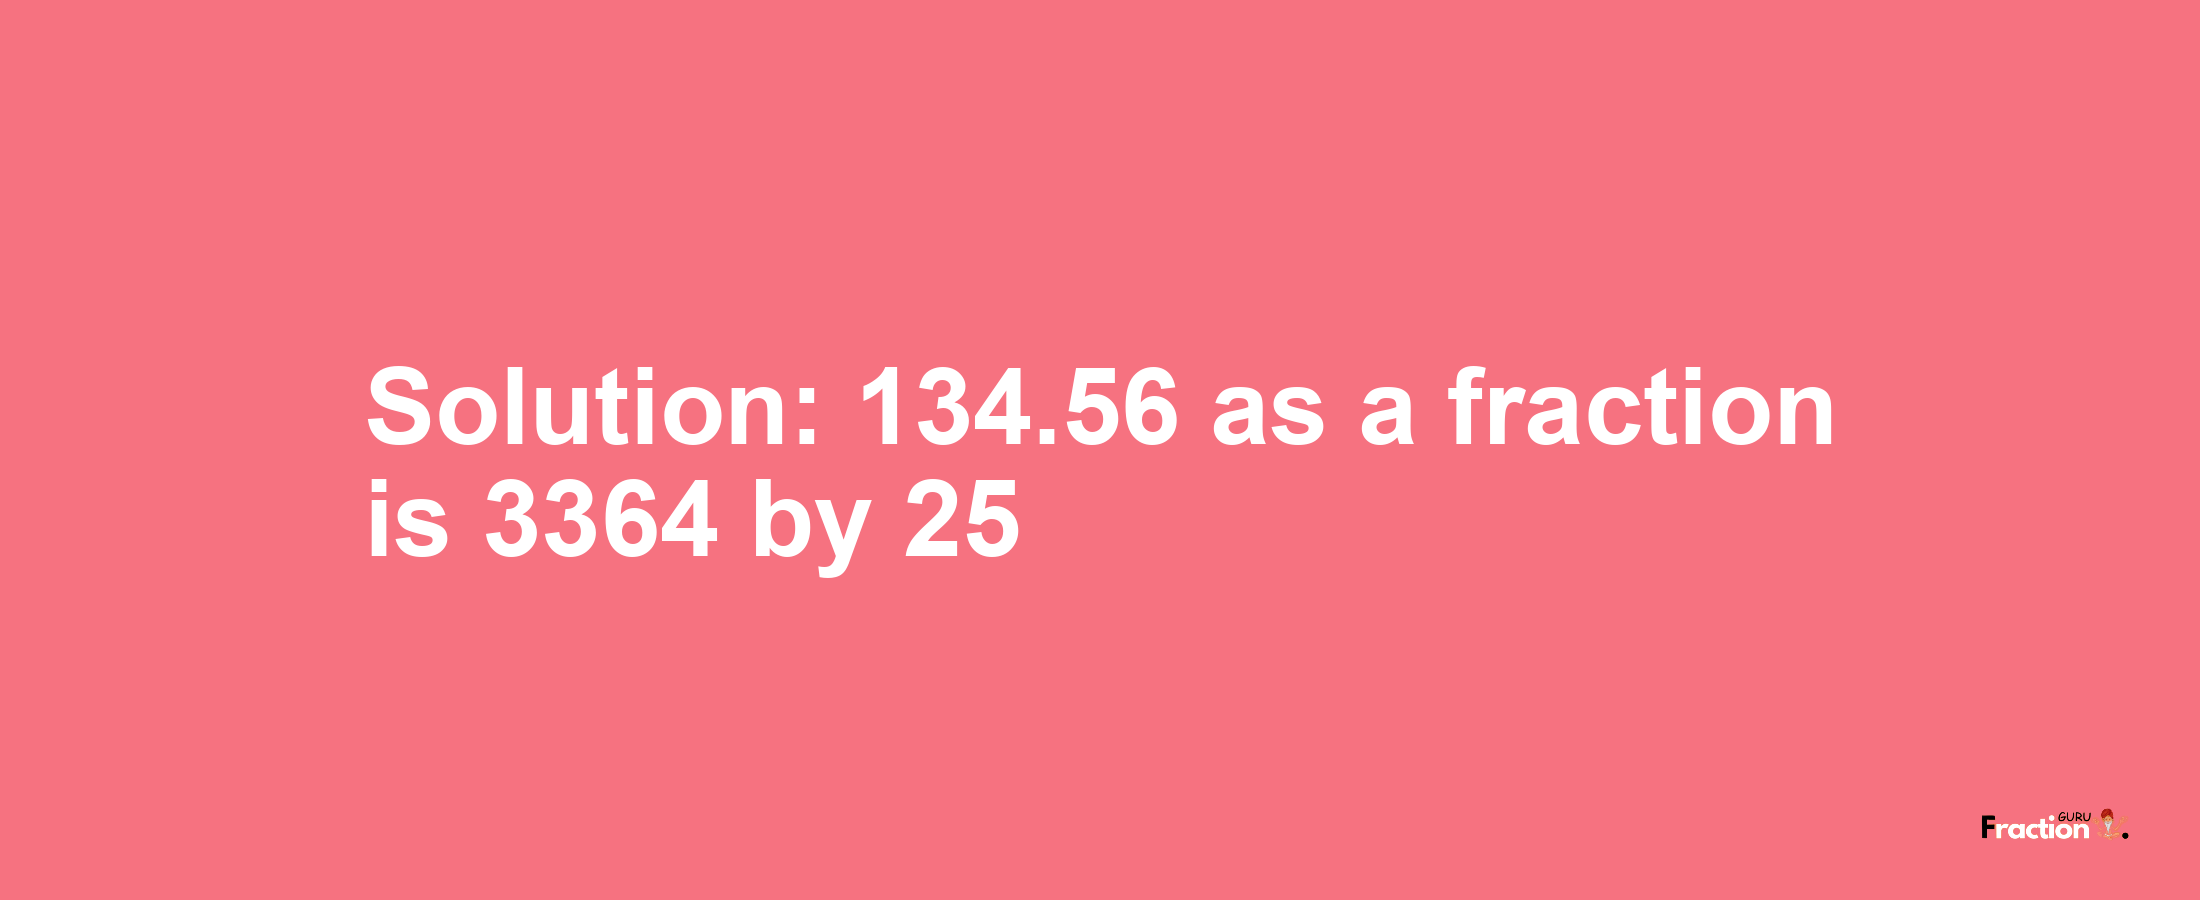 Solution:134.56 as a fraction is 3364/25